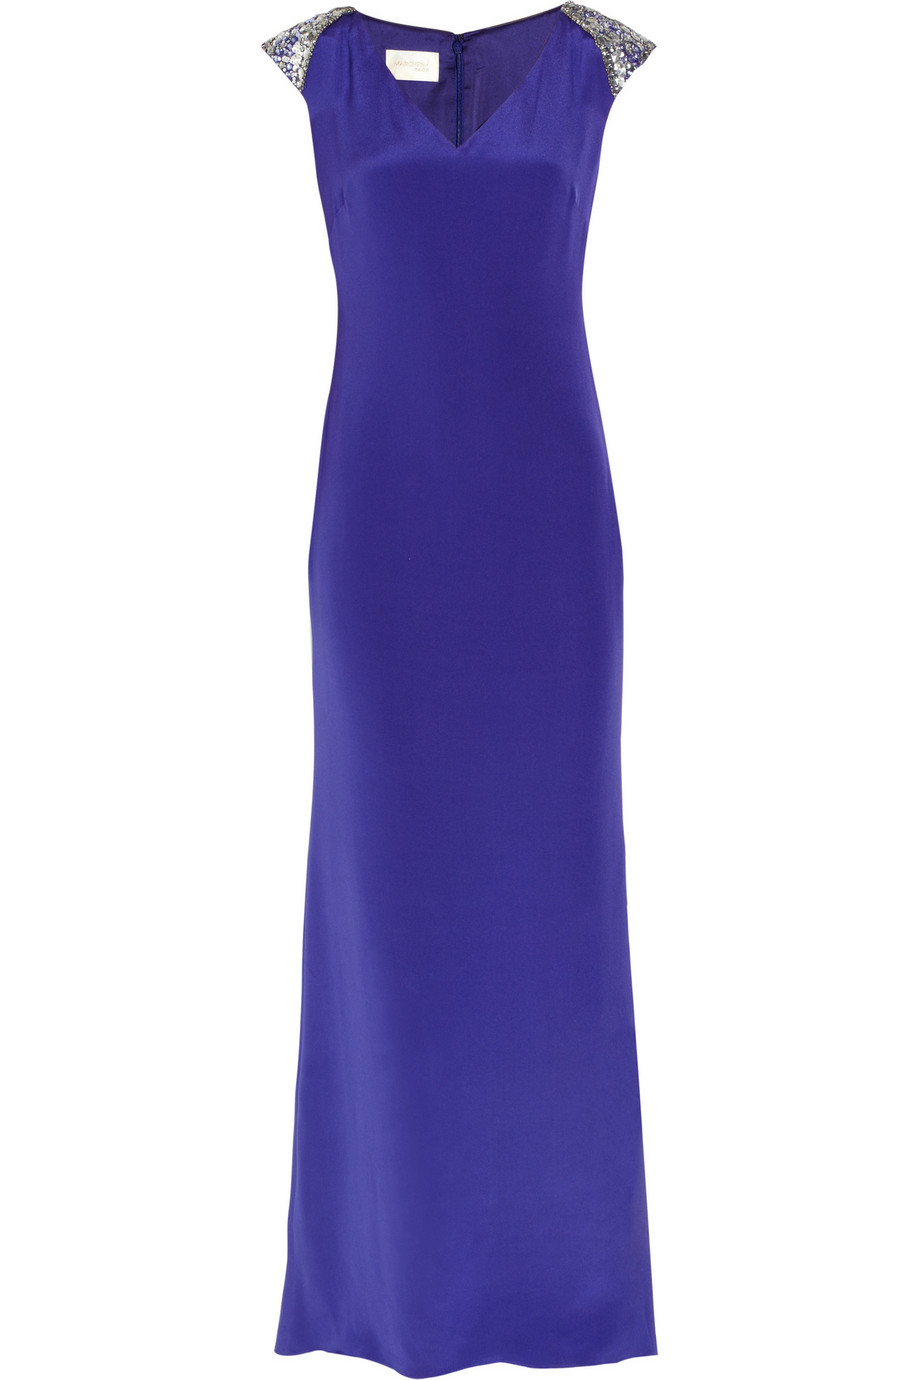 Lyst - Notte By Marchesa Embellished Silk-crepe Column Gown in Purple